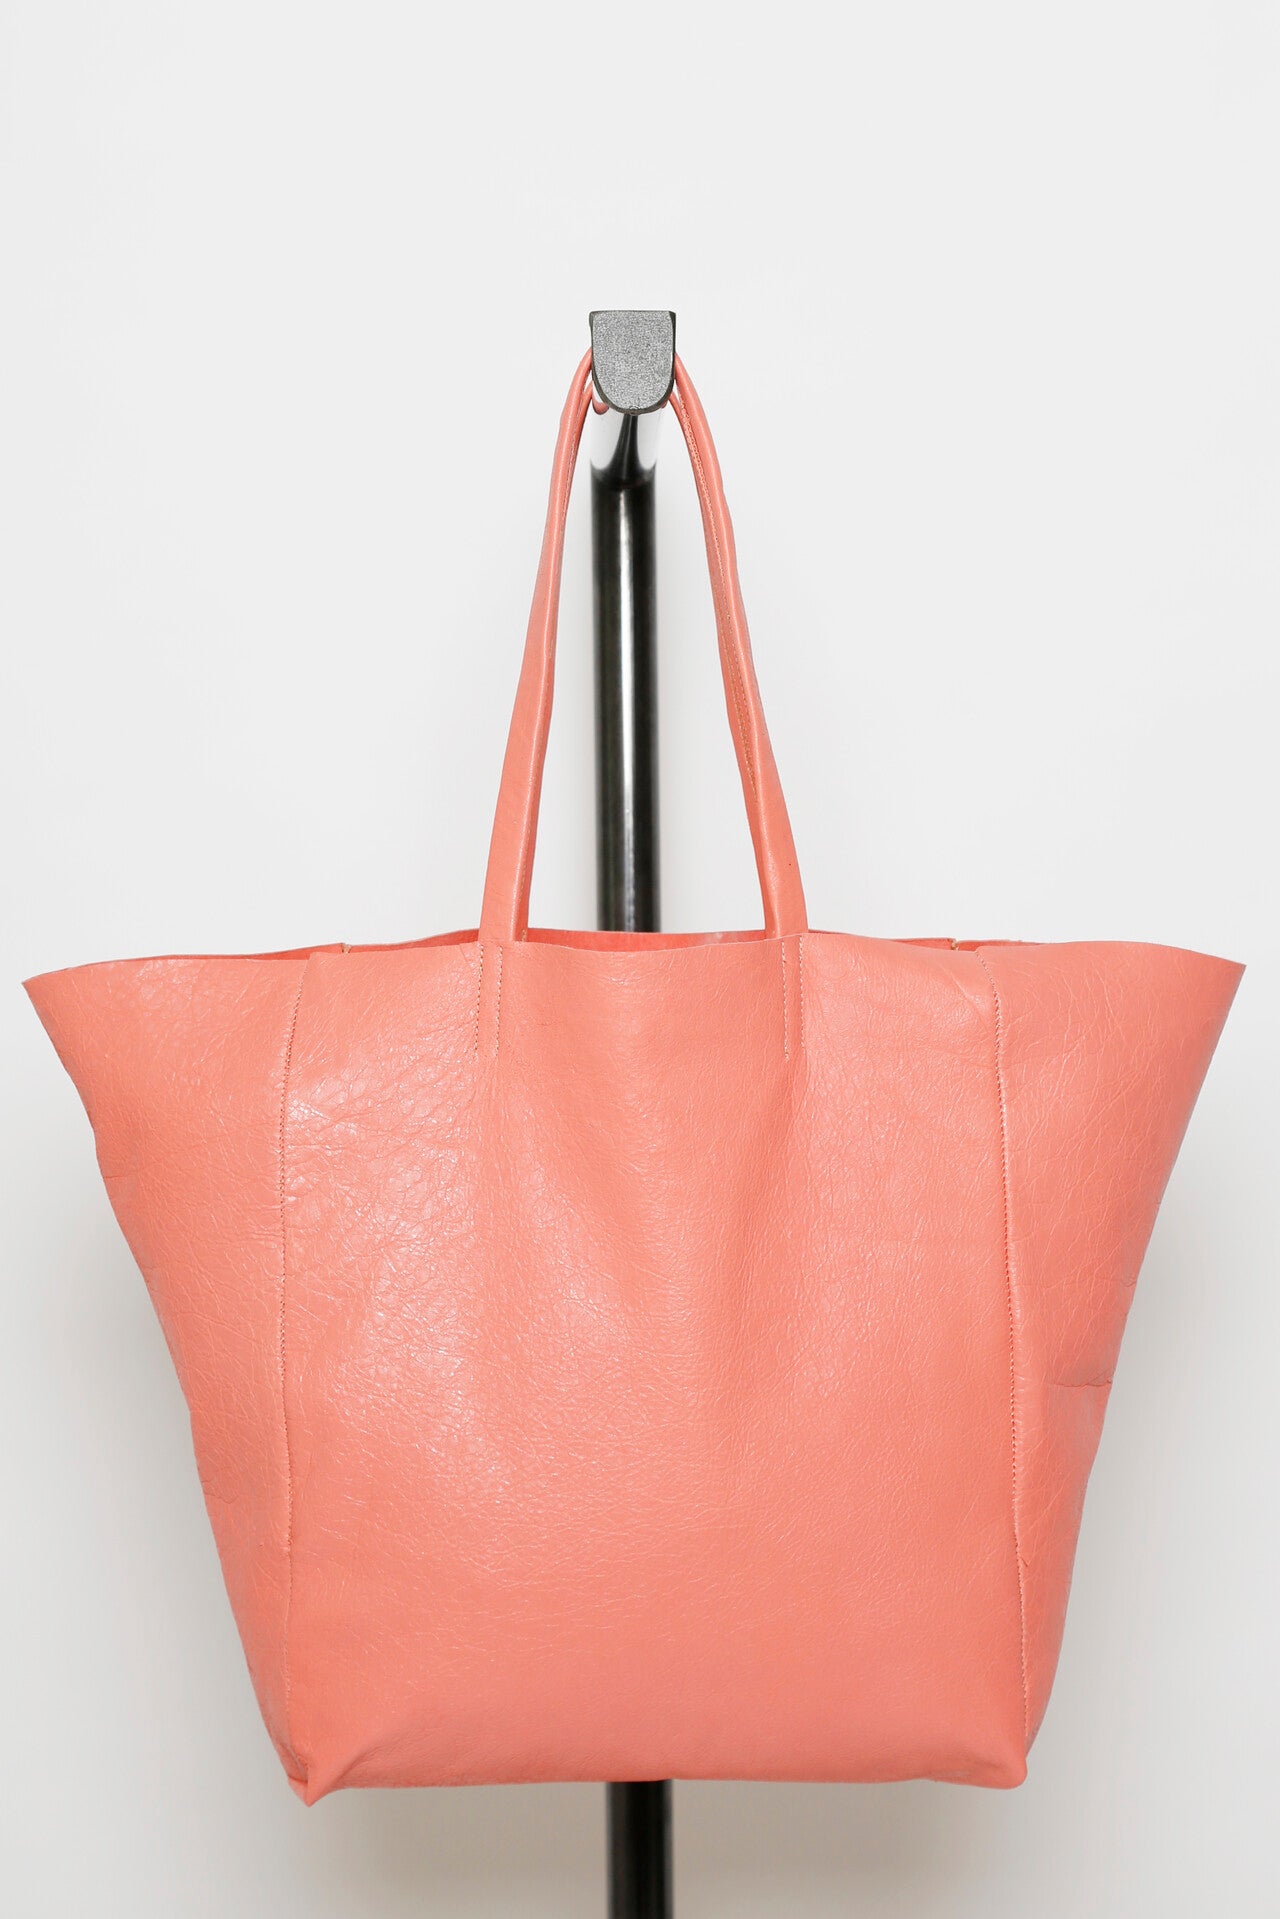 LEATHER SHOPPING TOTE SALMON